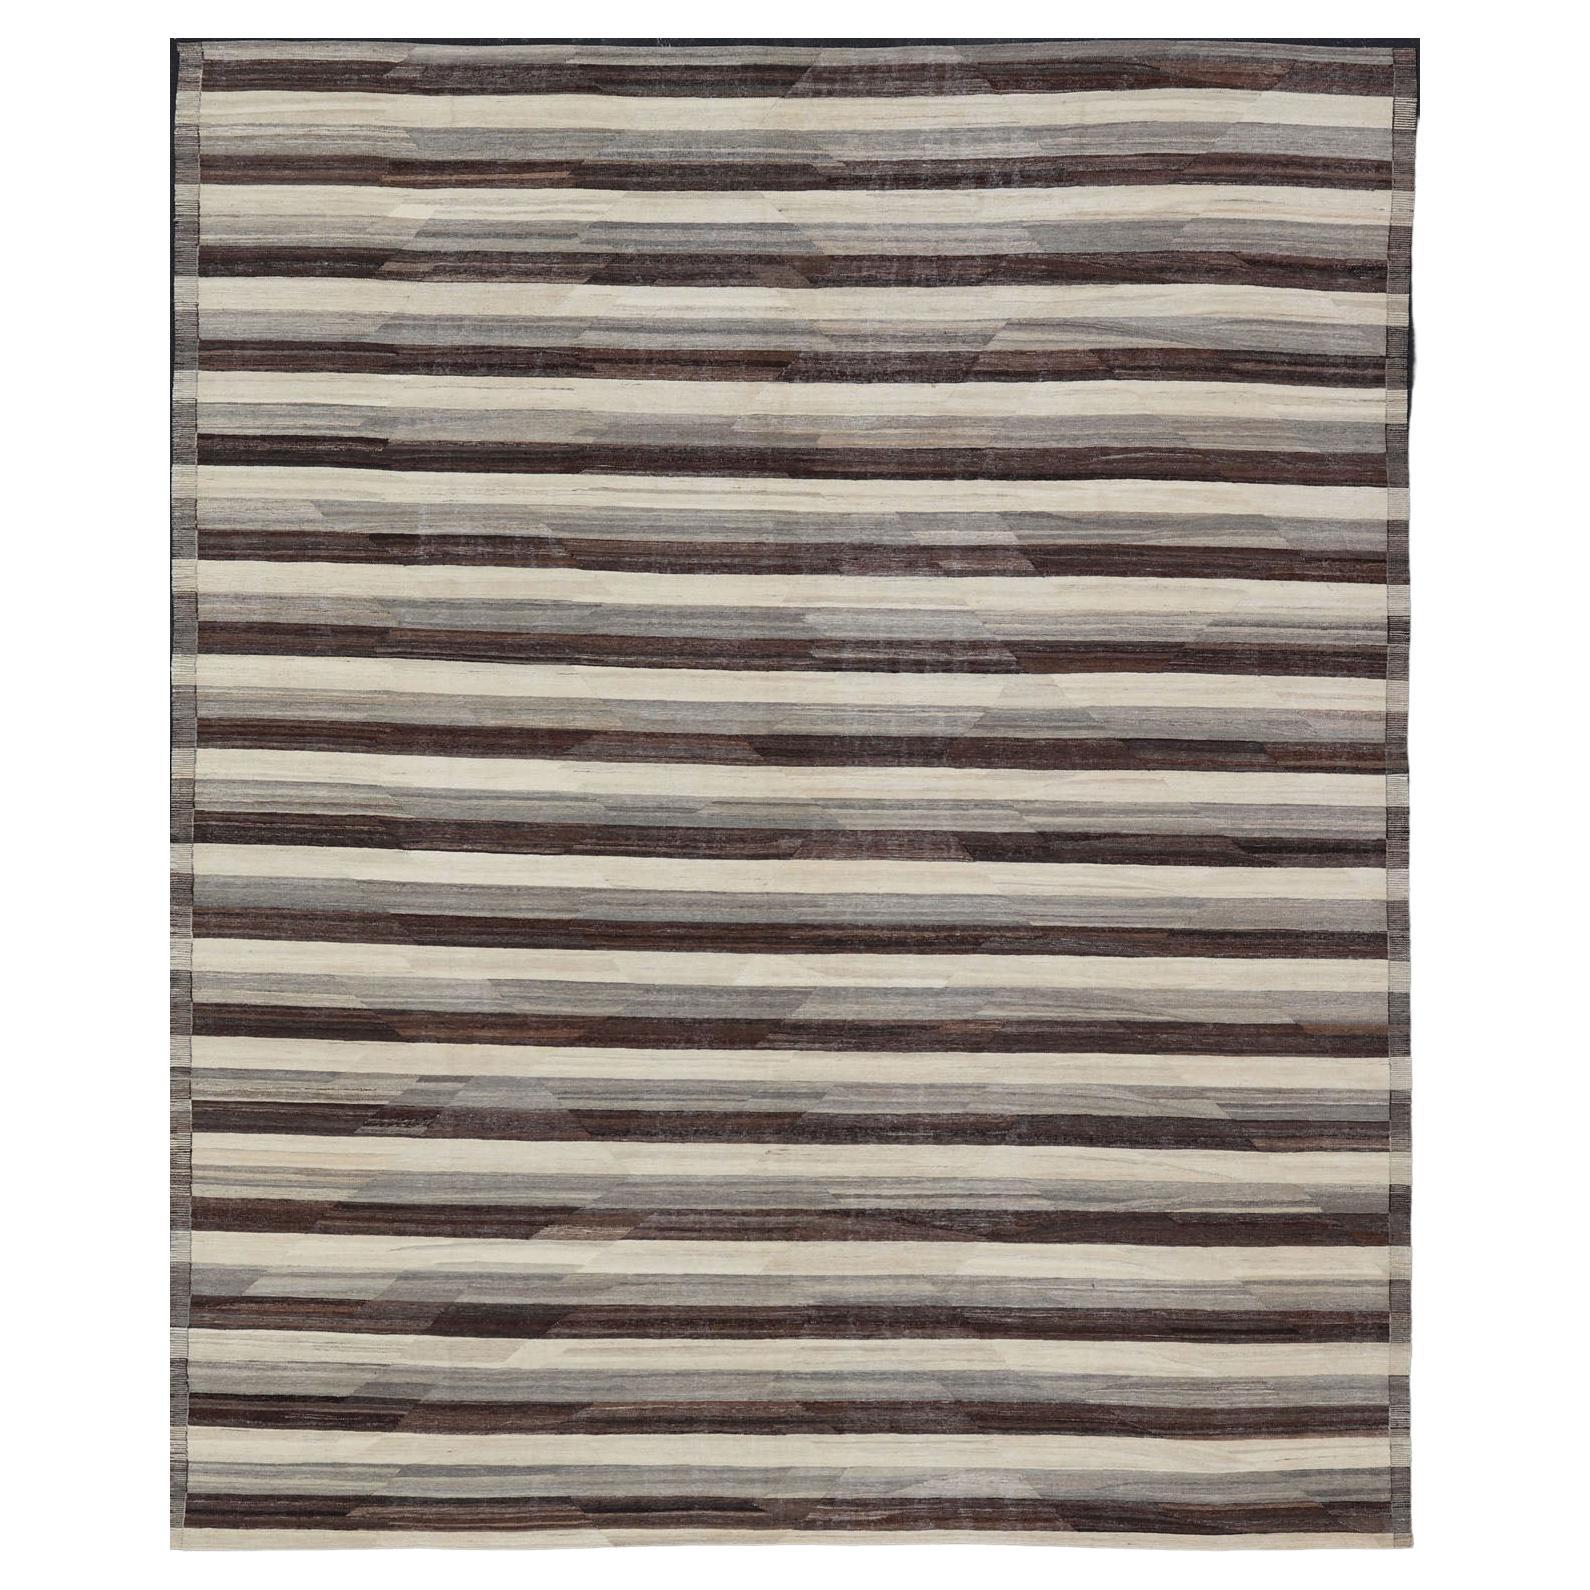 Large Hand-Woven Flat Weave Kilim in Cream, Taupe, and Dark Walnut For Sale